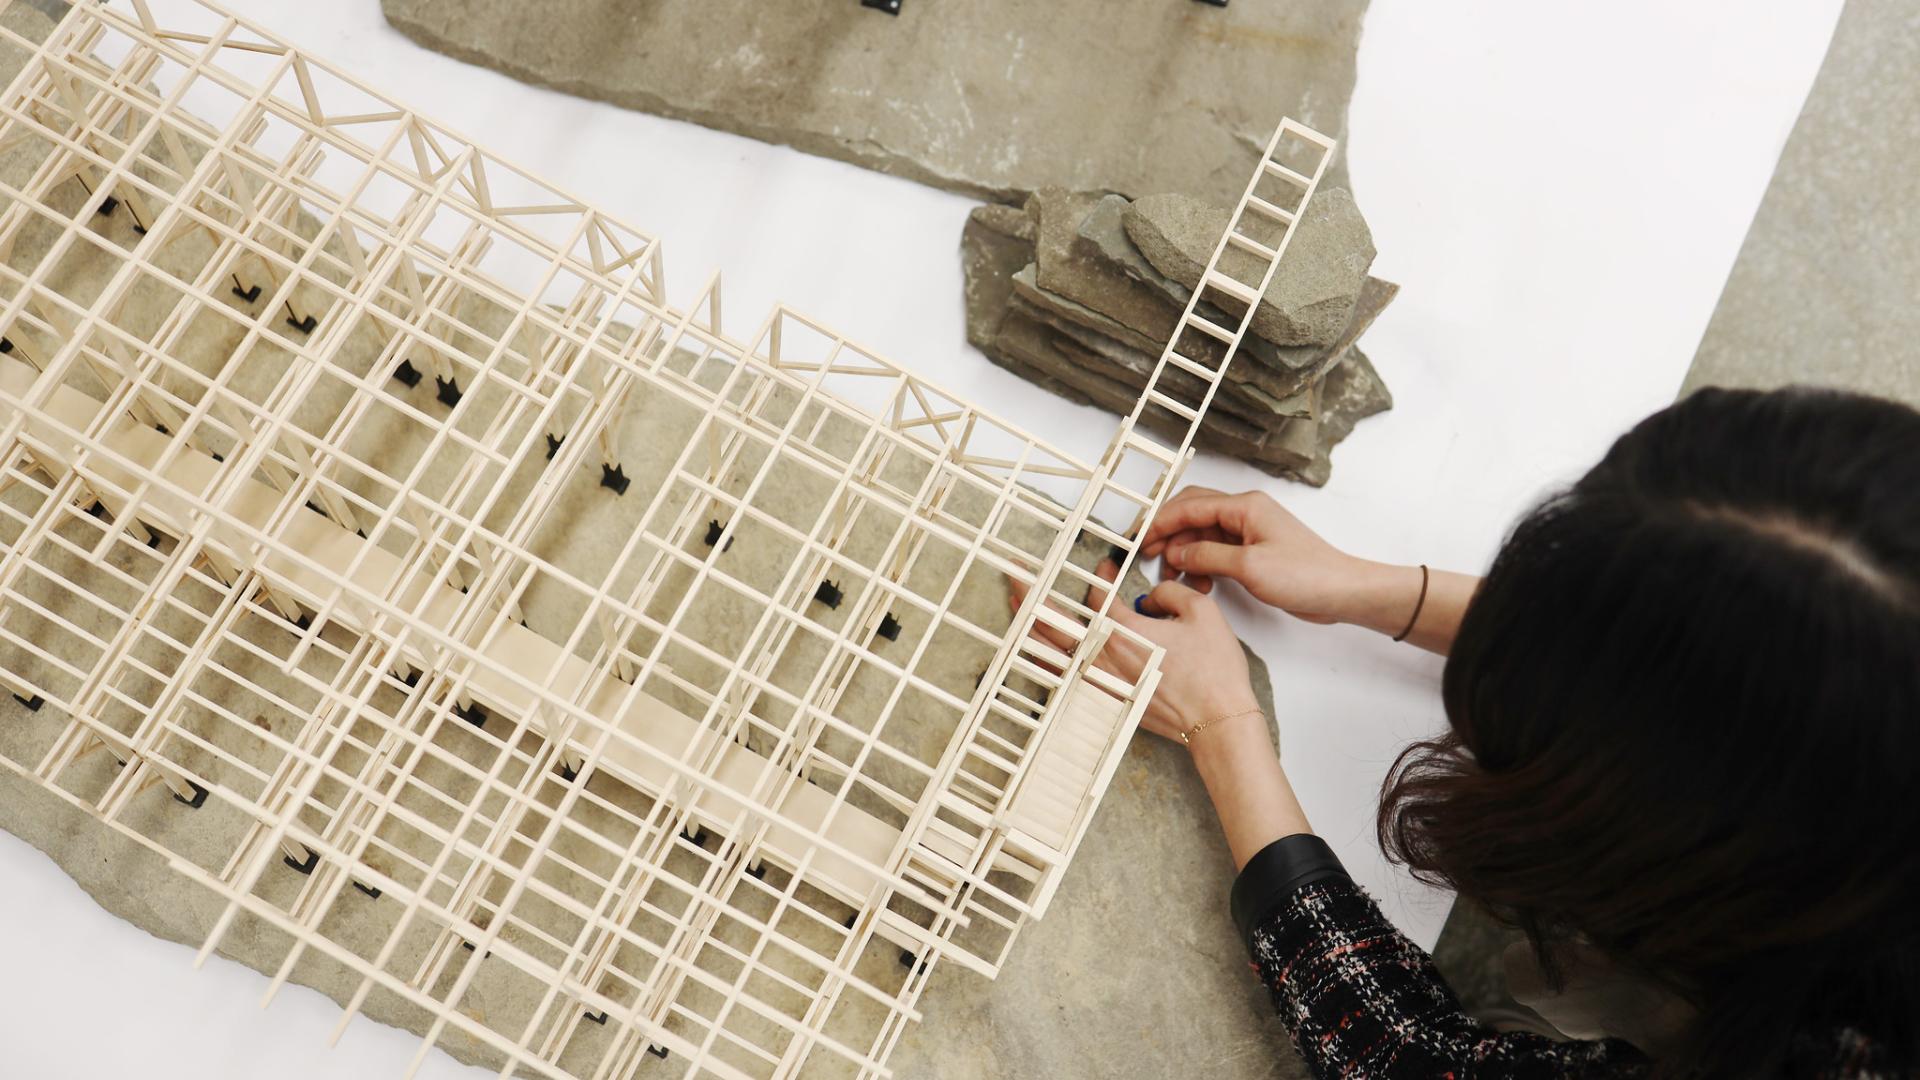 A person building a wooden architectural model.